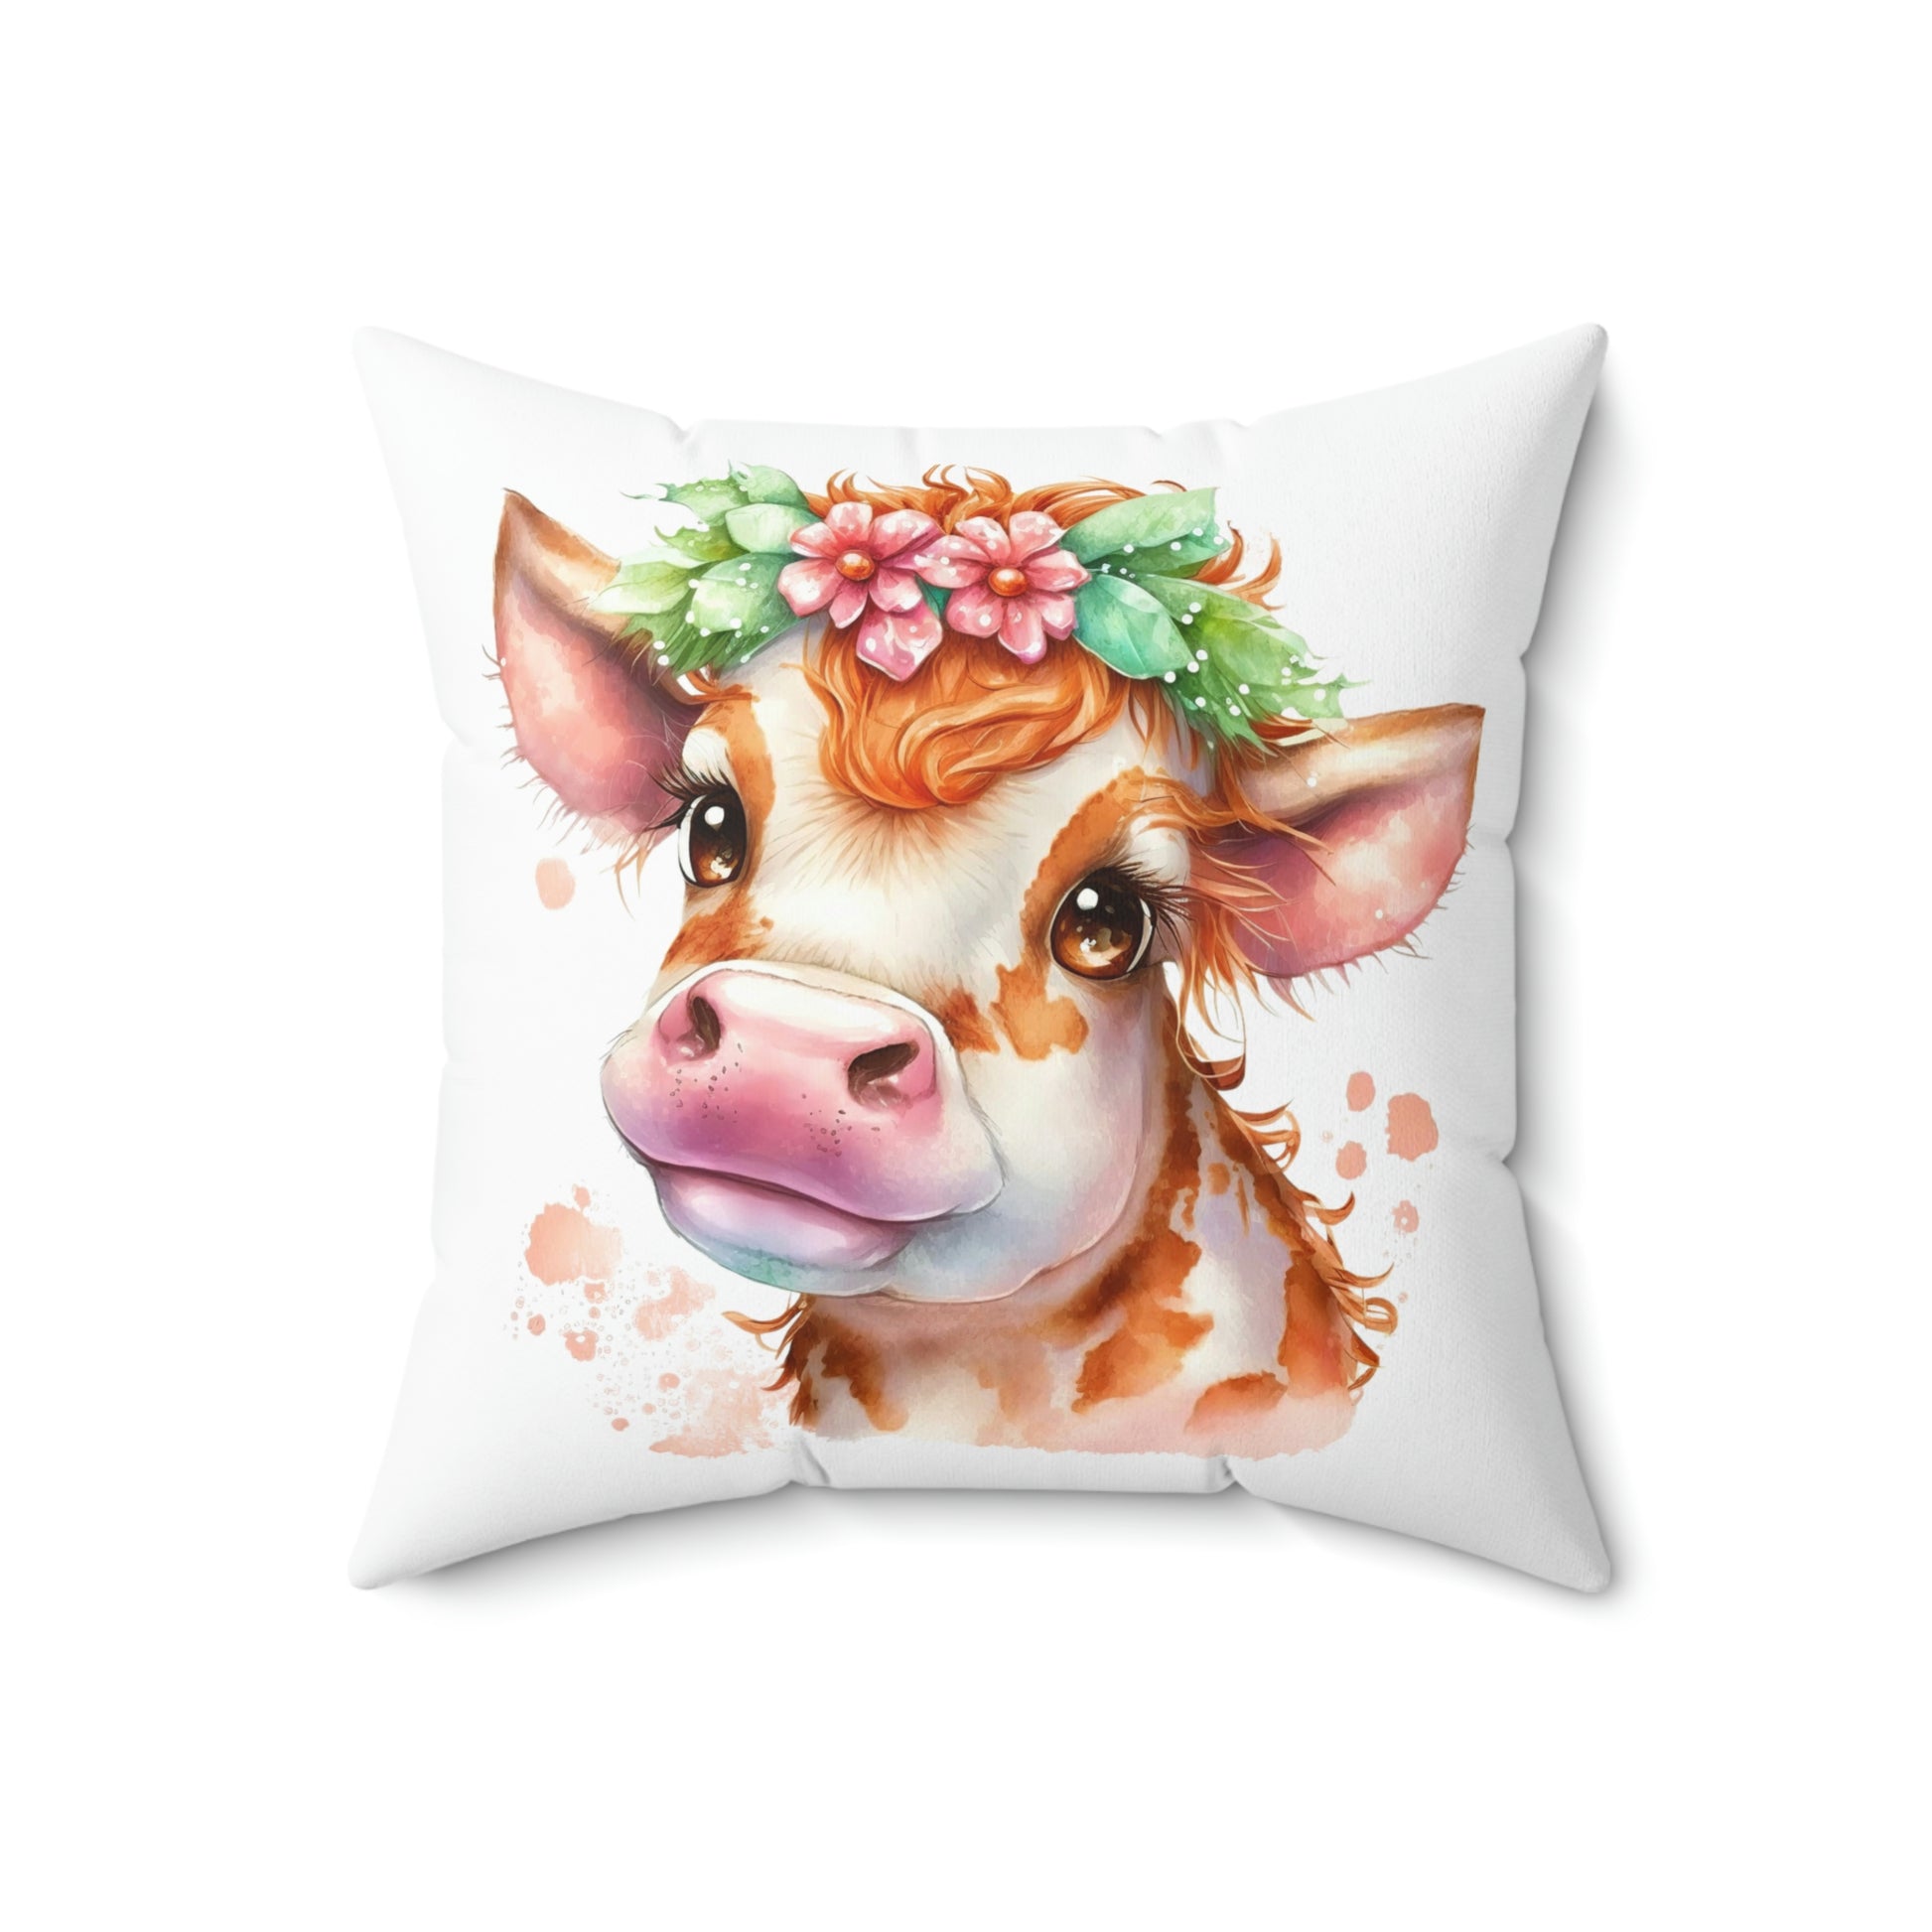 cow pillow for your cow theme room decor, floral cow pattern accent throw pillow, cow throw pillow sitting on a couch or chair, watercolor cow print pillow